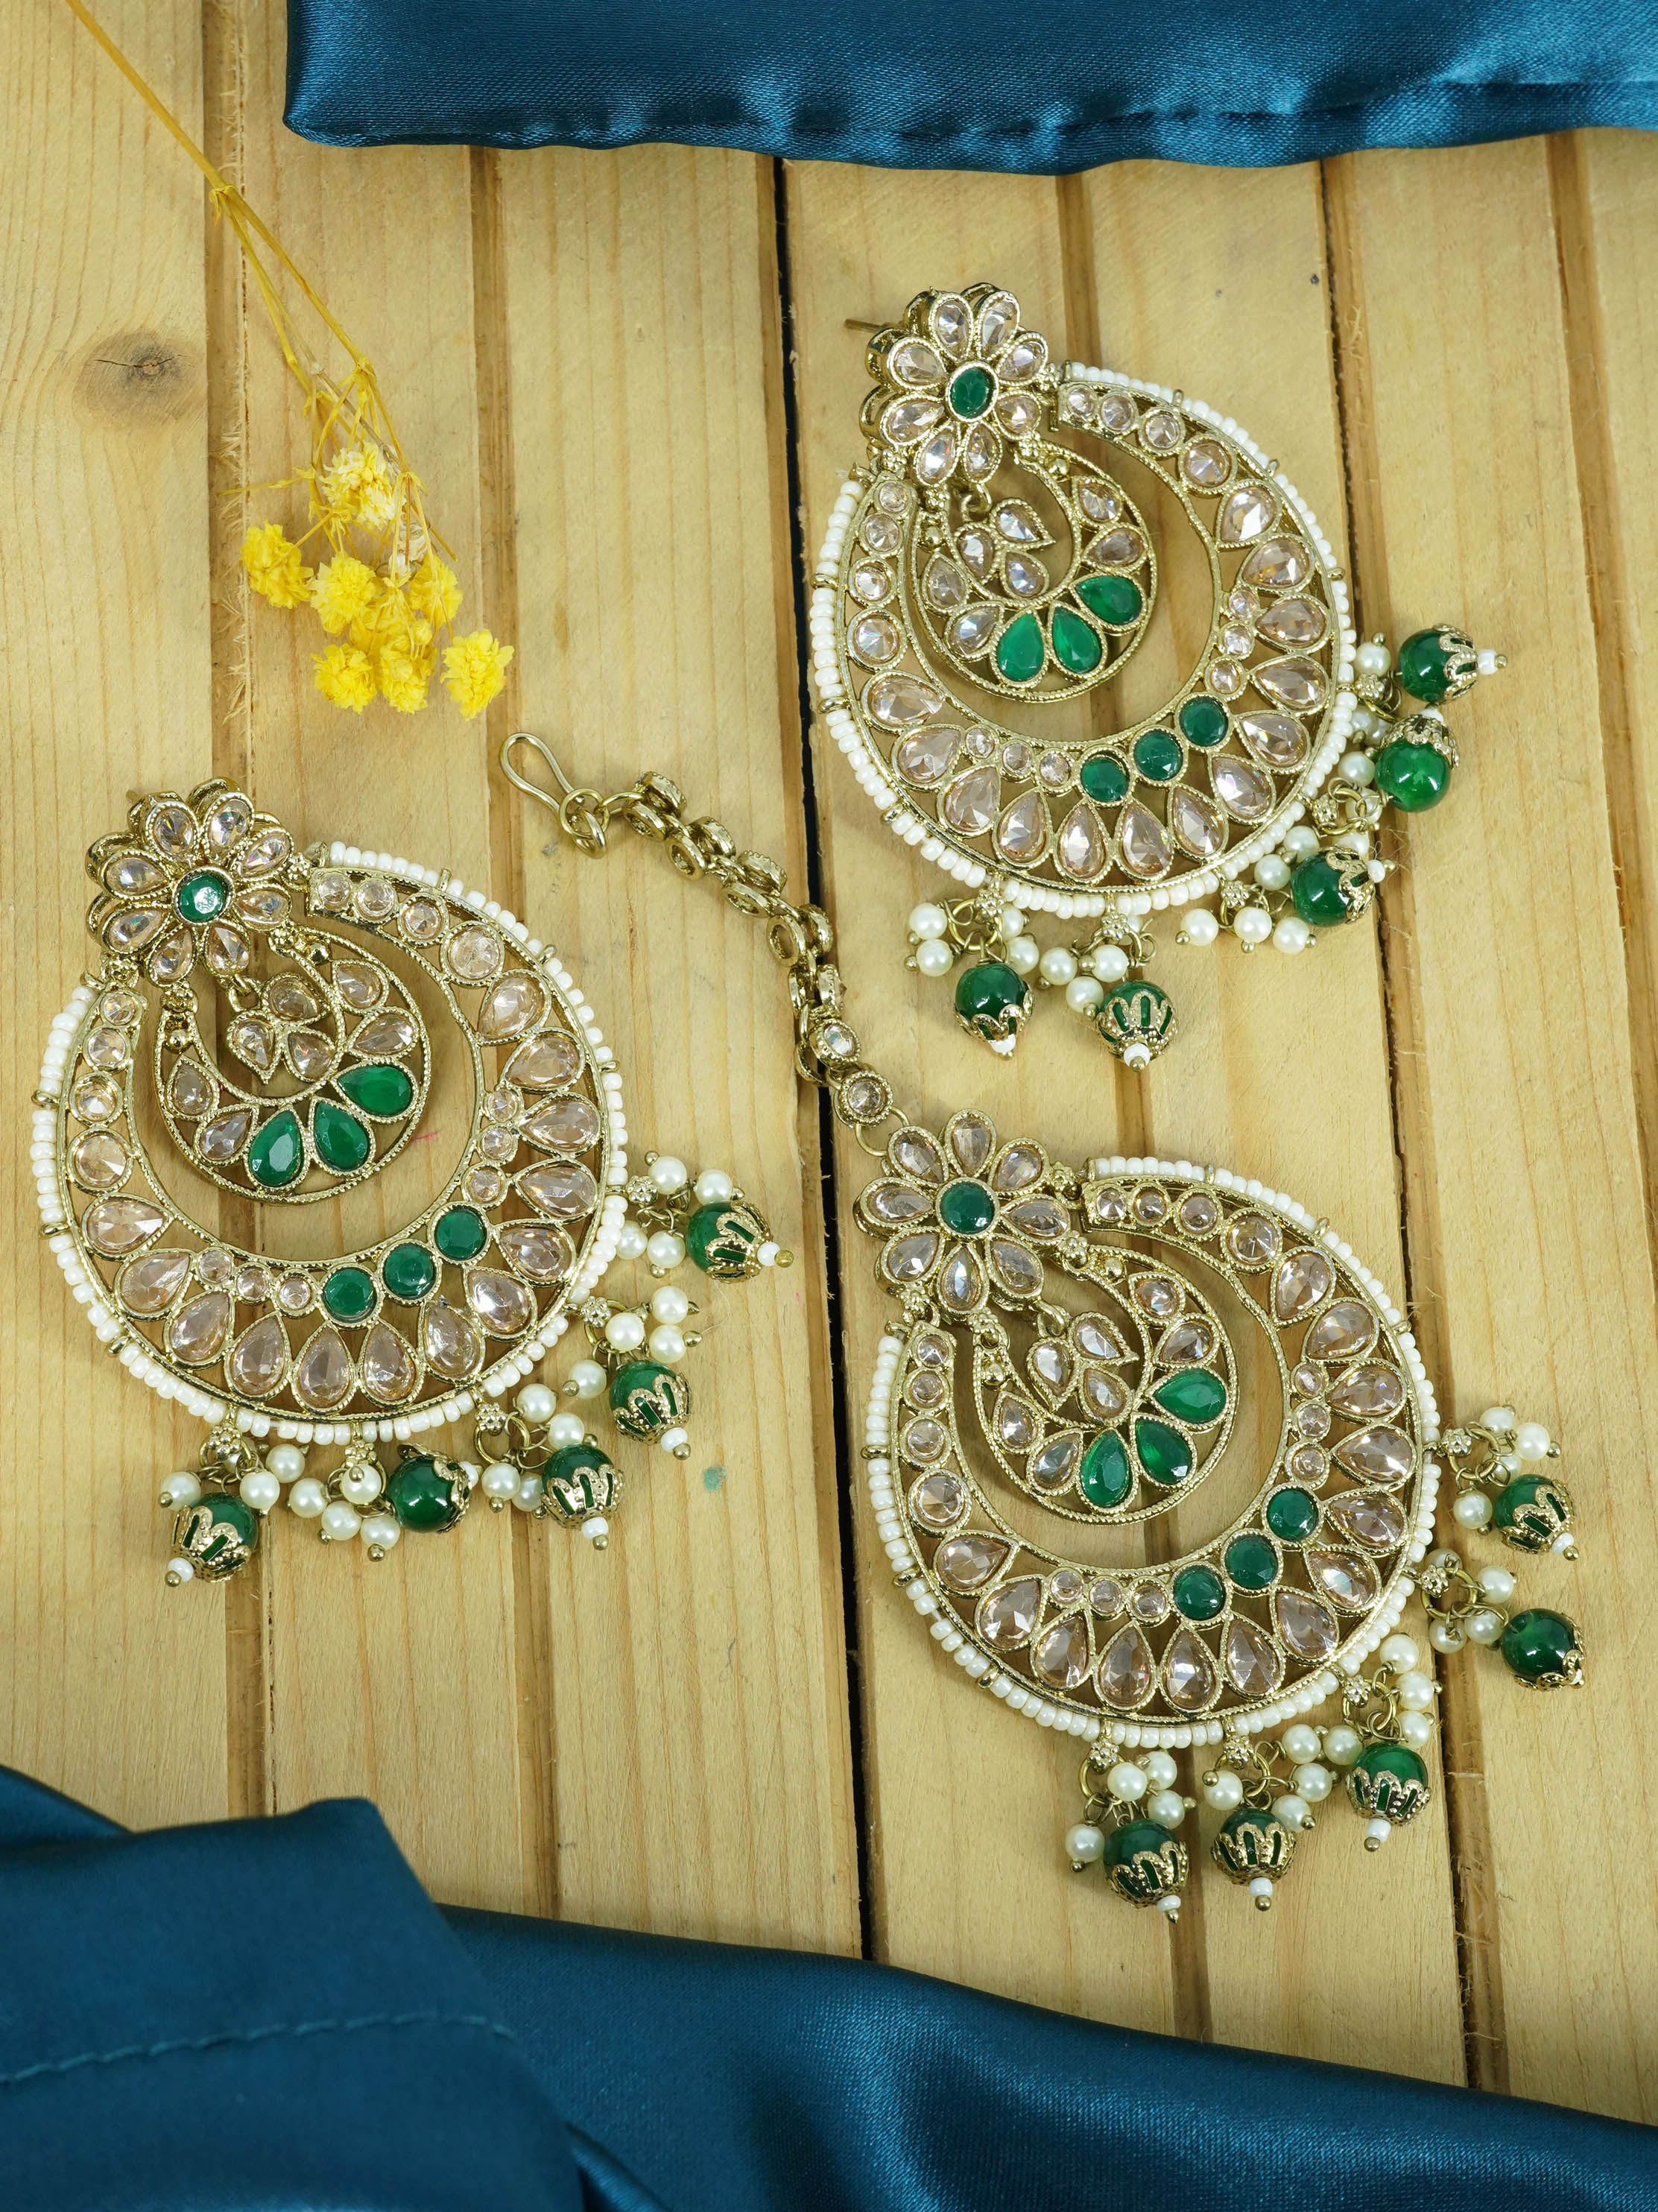 Faint gold finish Earring/jhumka/Dangler stuuded with Mirror Stones with Mang Tikka and Multi Color Drops 11819N